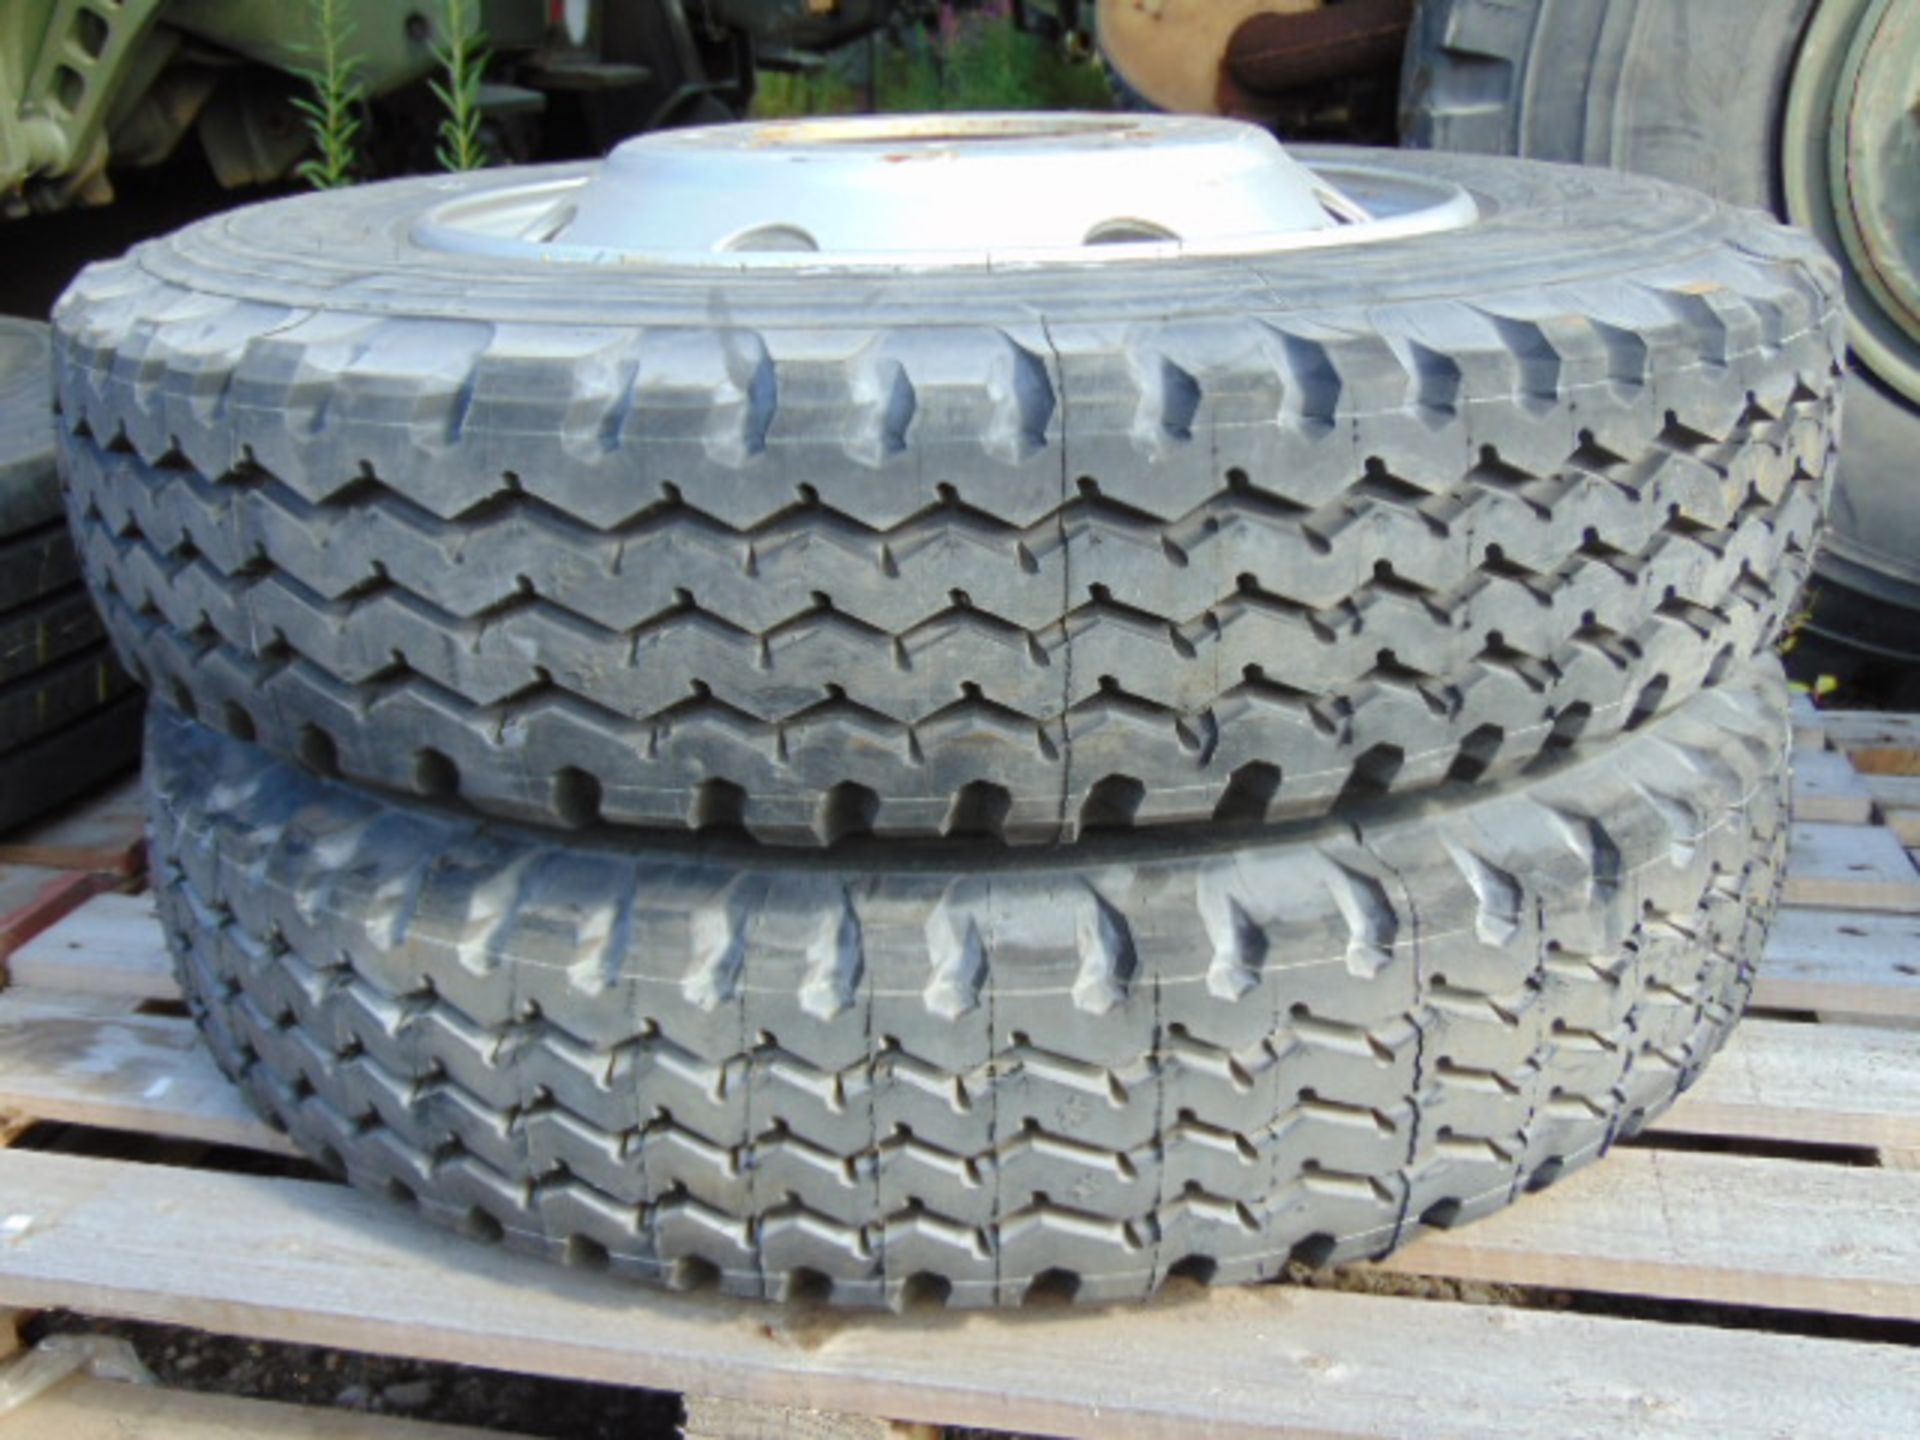 2 x Michelin 9R 22.5 XZY Tyres on 8 Stud Rims - Image 2 of 6